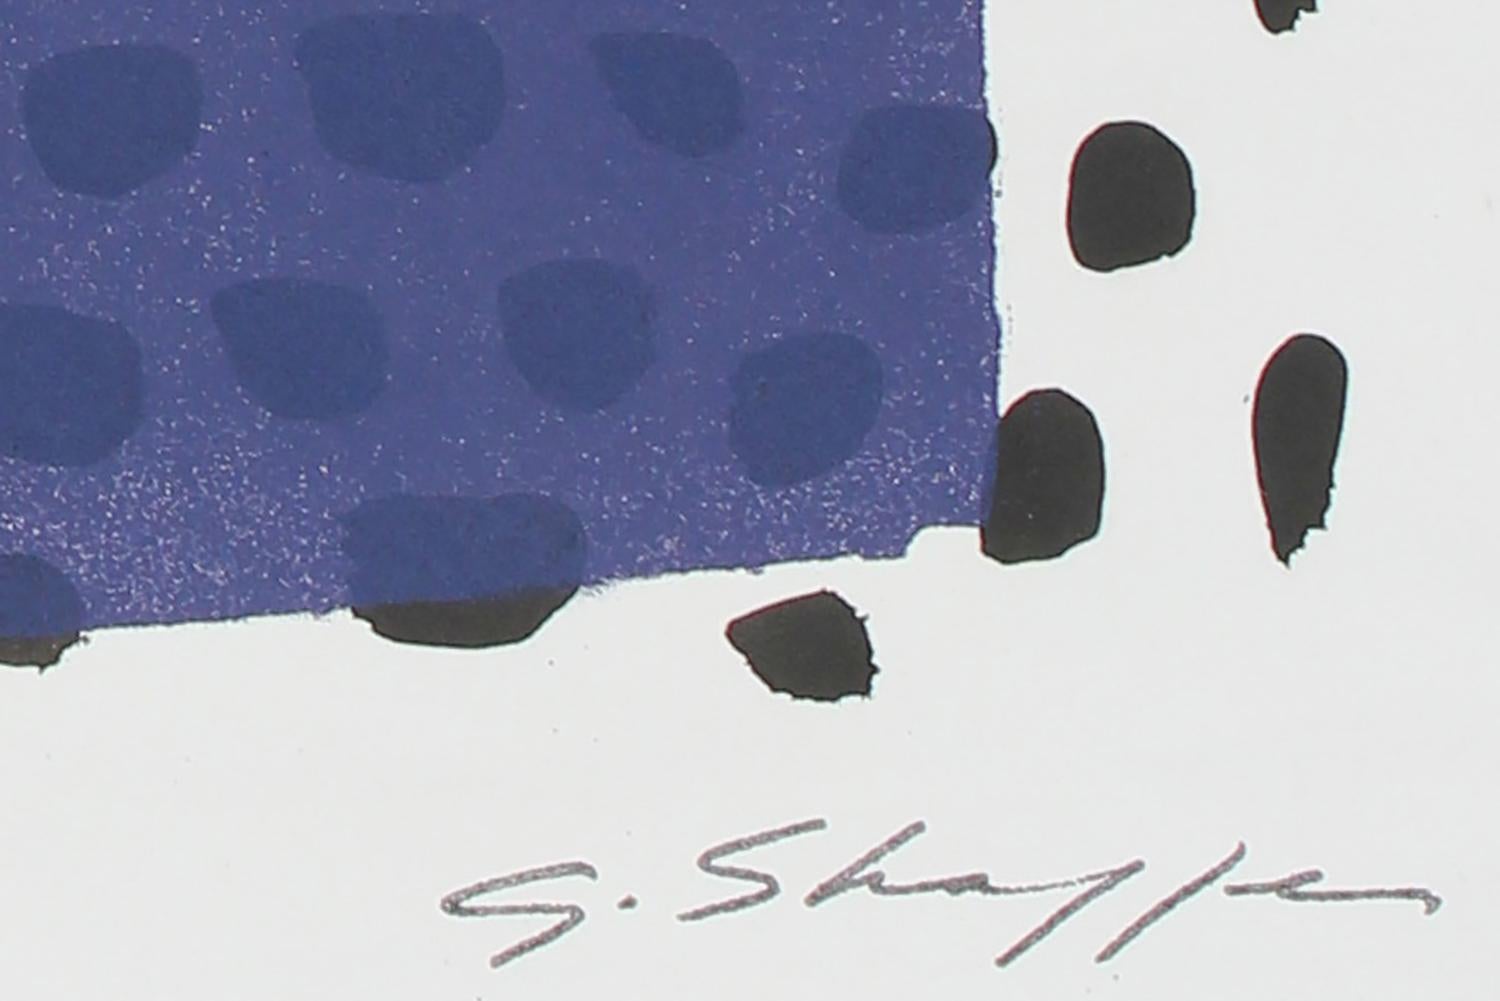 This late 20th century lithograph on paper with a blue square and black details is by New York/San Francisco Abstract Expressionist artist Gary Lee Shaffer (1936-2001). Shaffer trained with Hans Hofmann in the late 1950s and became an influential